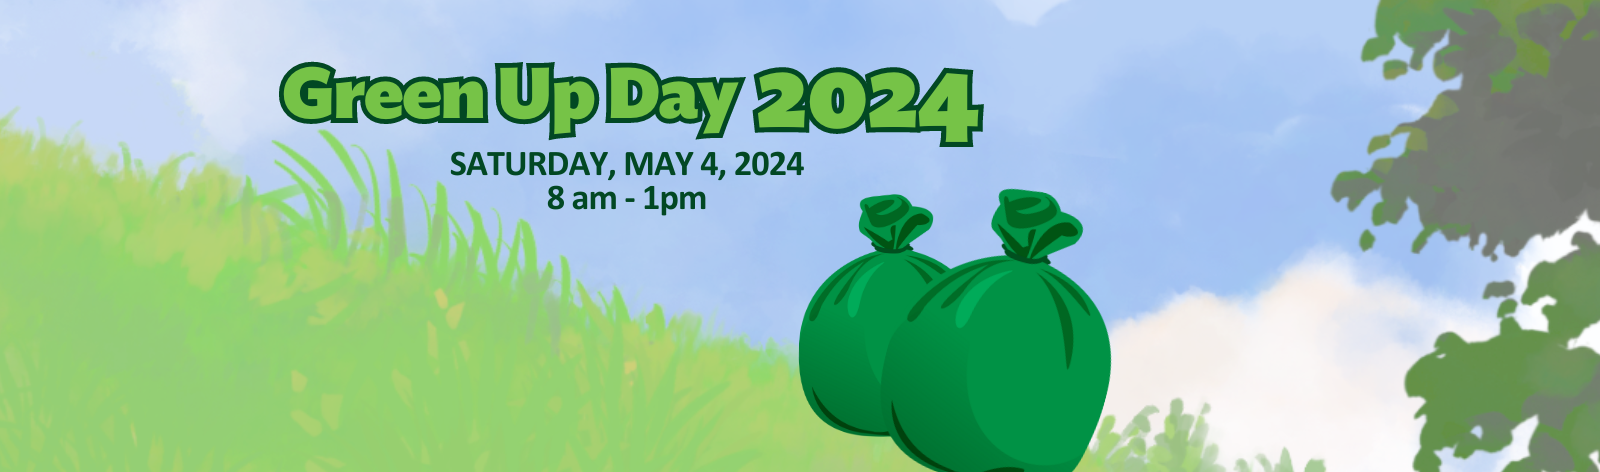 Green Up Day 2024